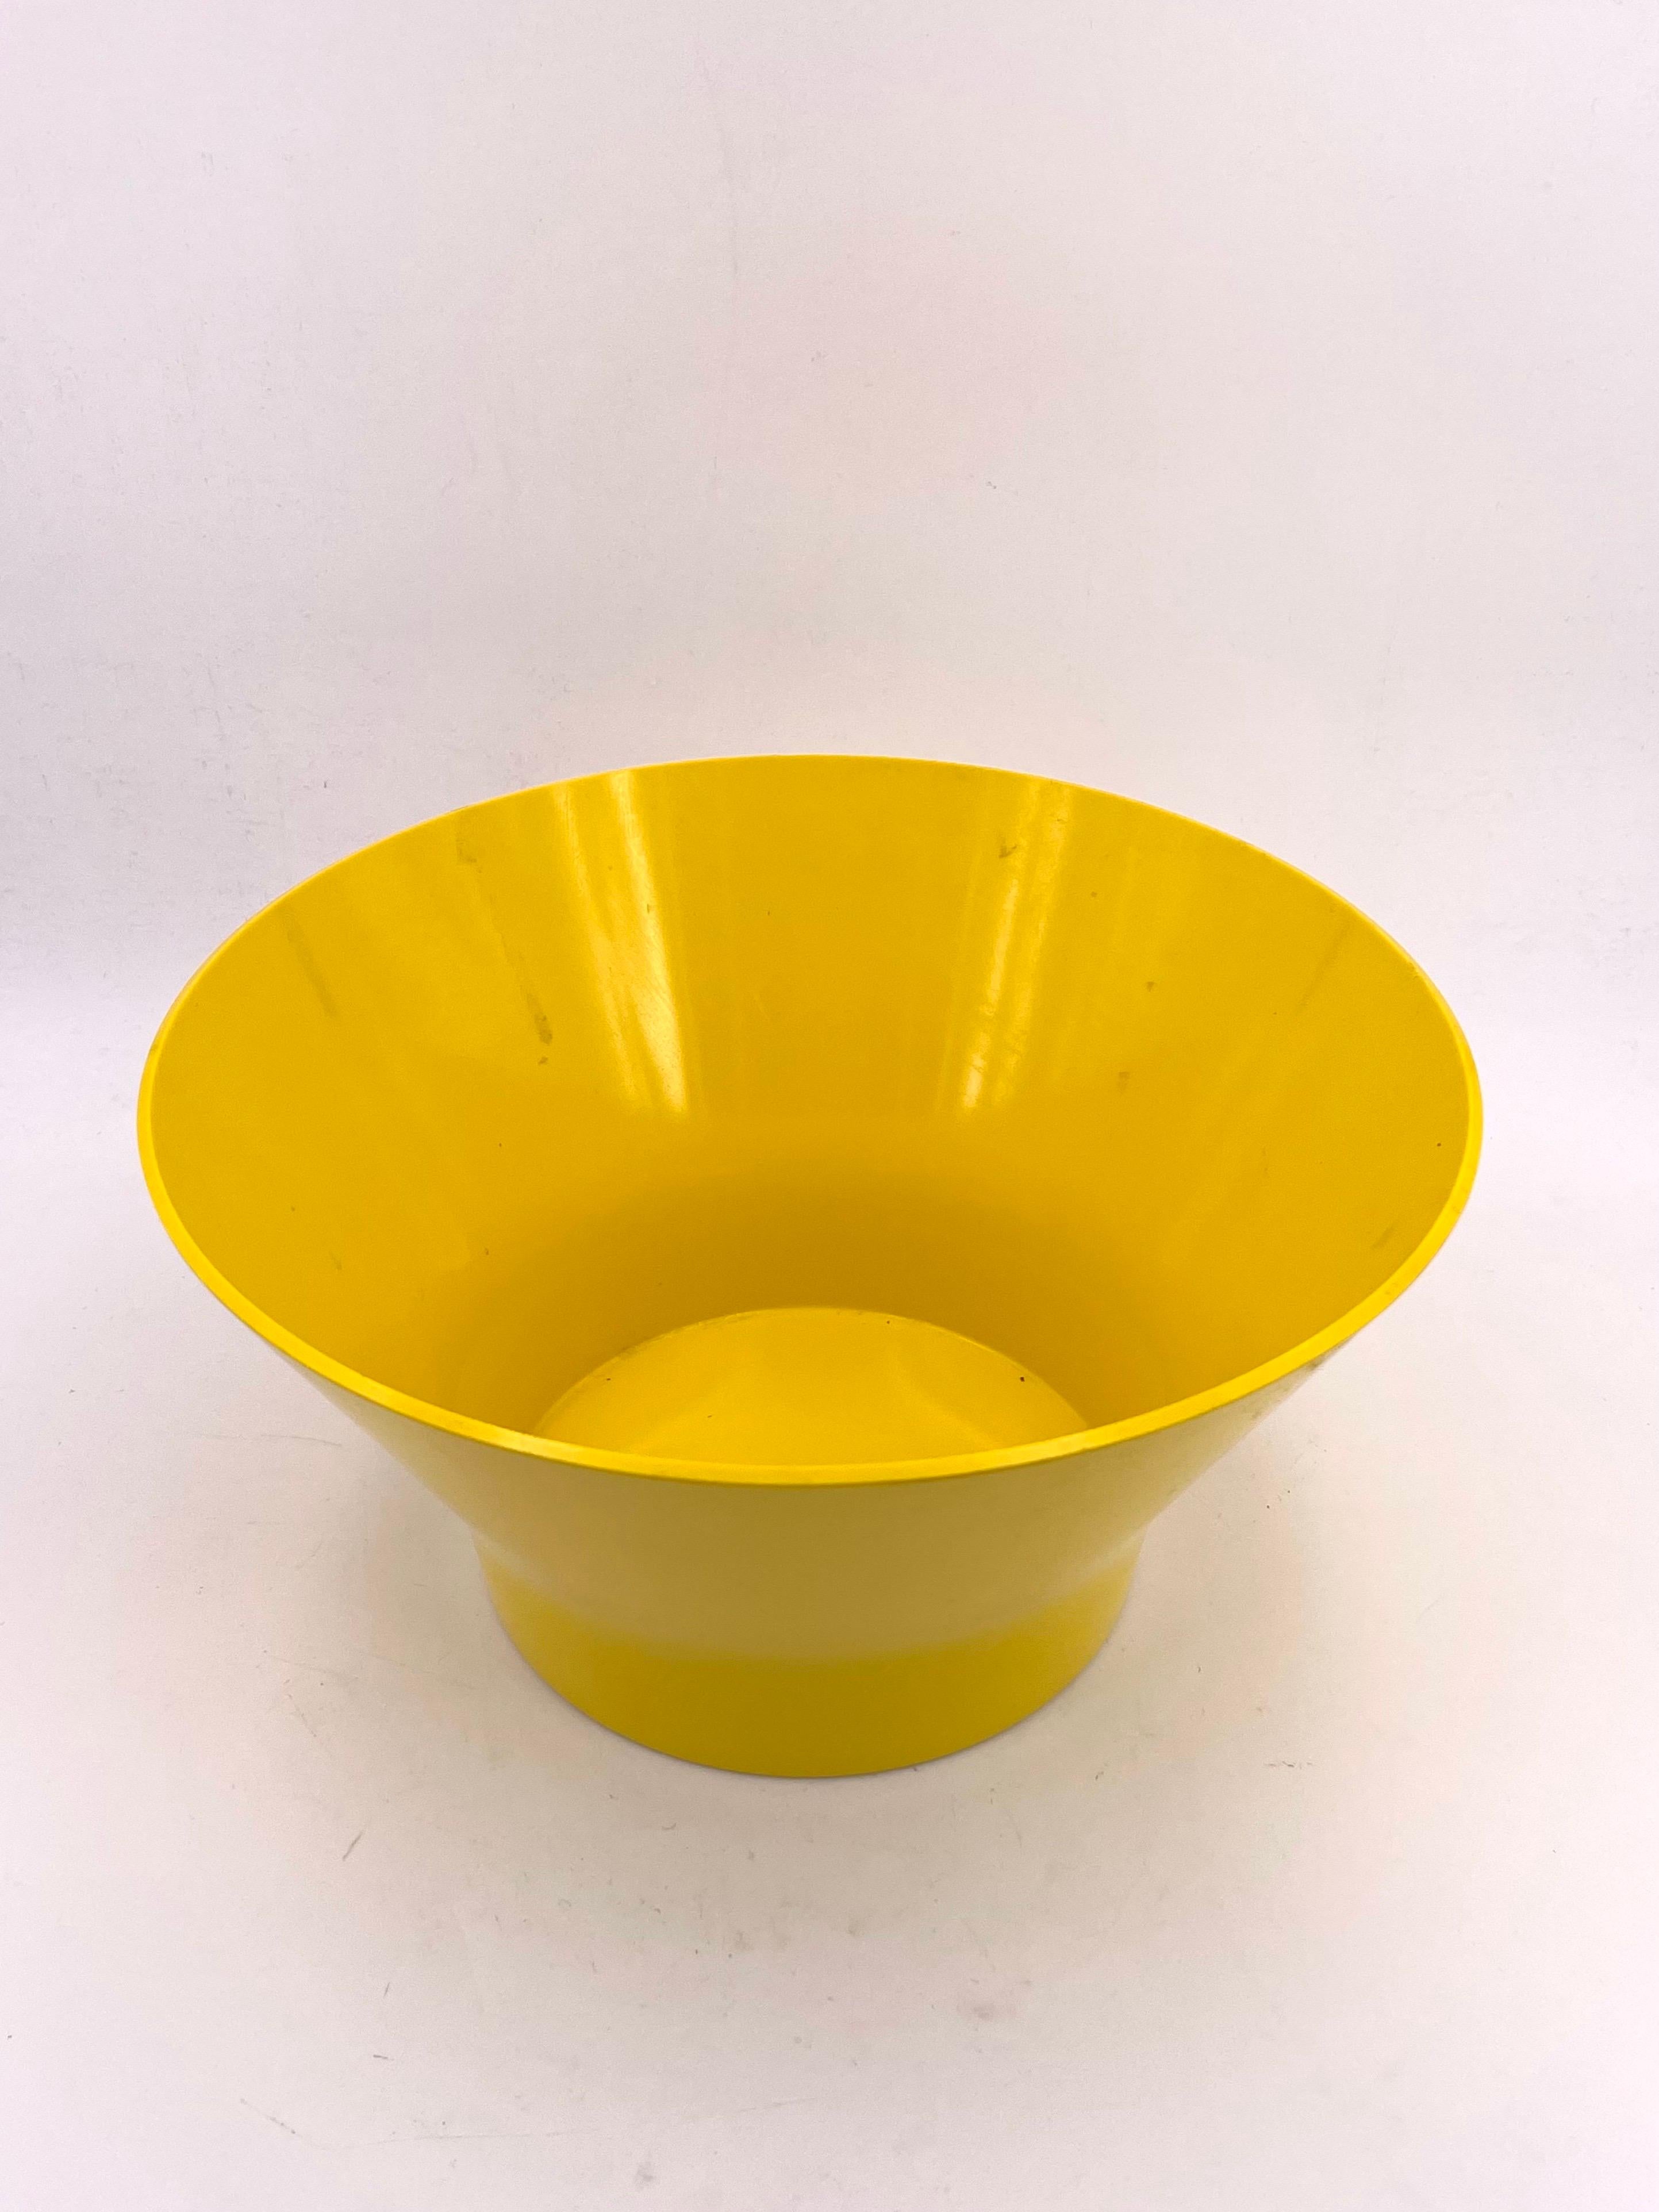 Beautiful and rare melamine yellow bowl designed by Henning Koppel for Torben Orskov , circa 1980's nice clean condition beautiful color.